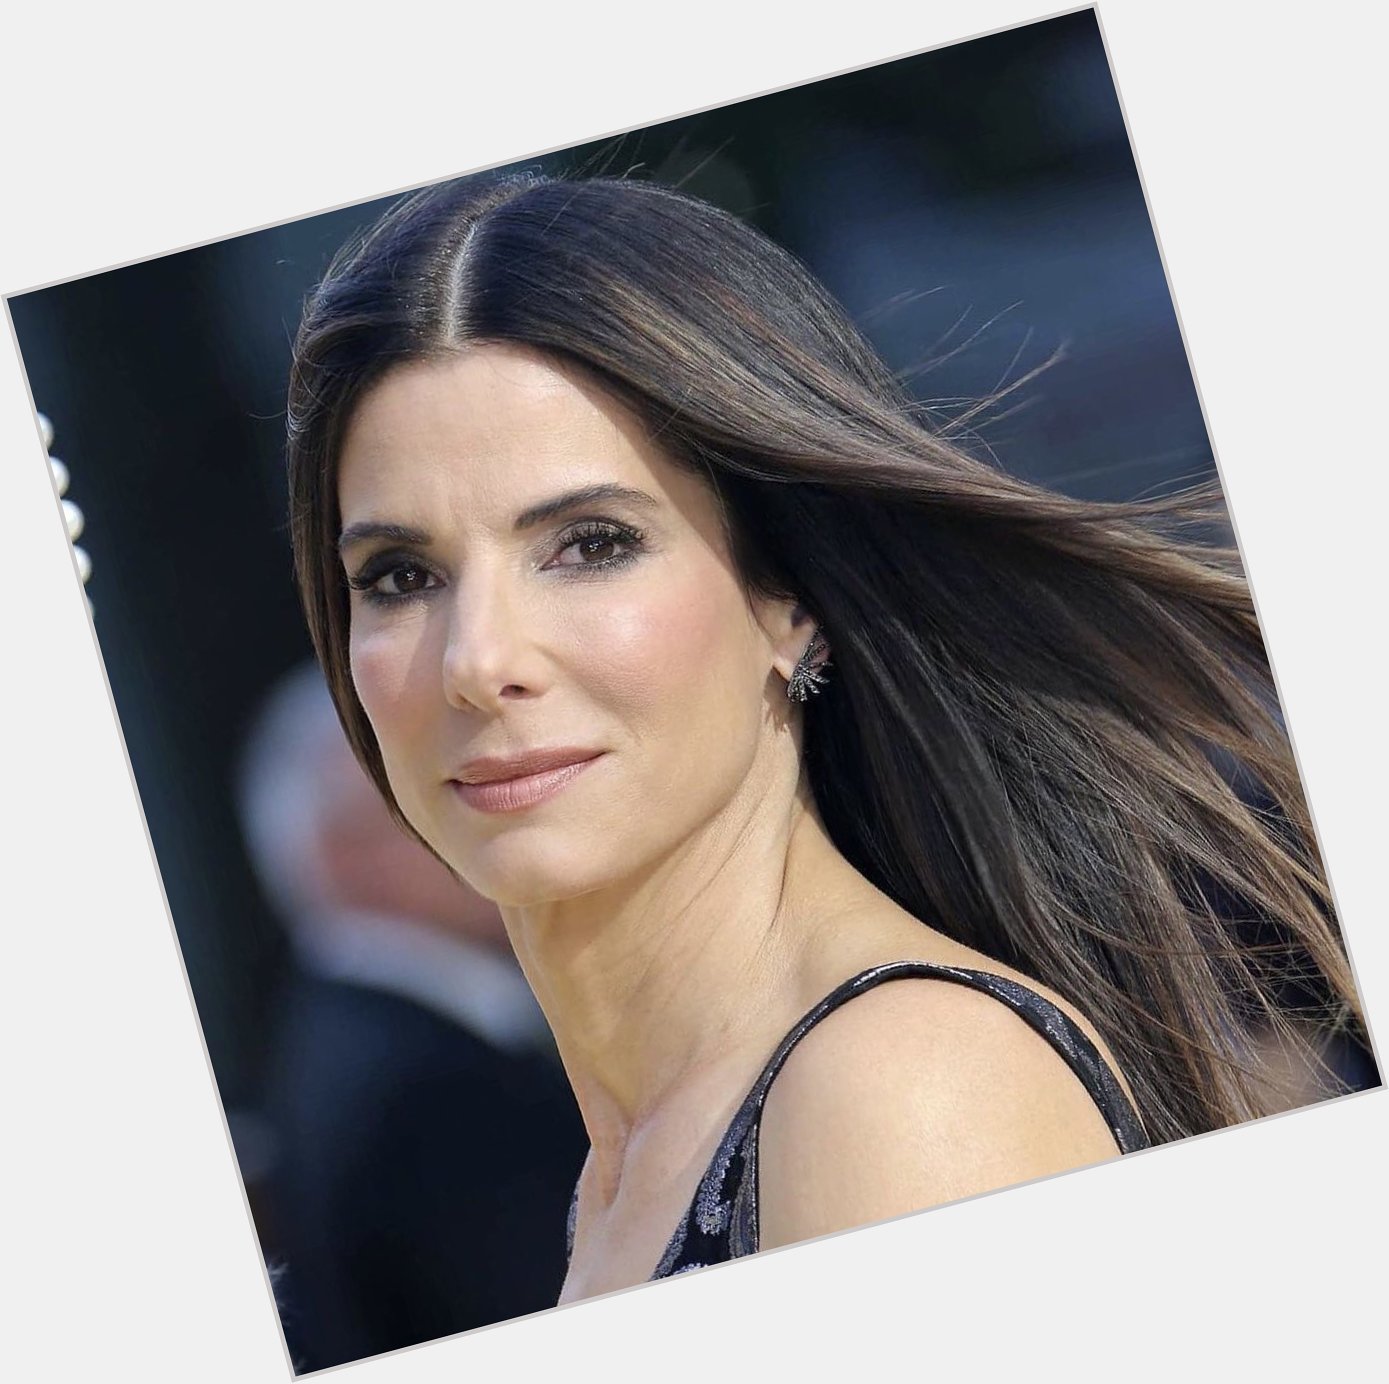 HAPPY BIRTHDAY TO THE BEST PERSON IN THE WORLD SANDRA BULLOCK 